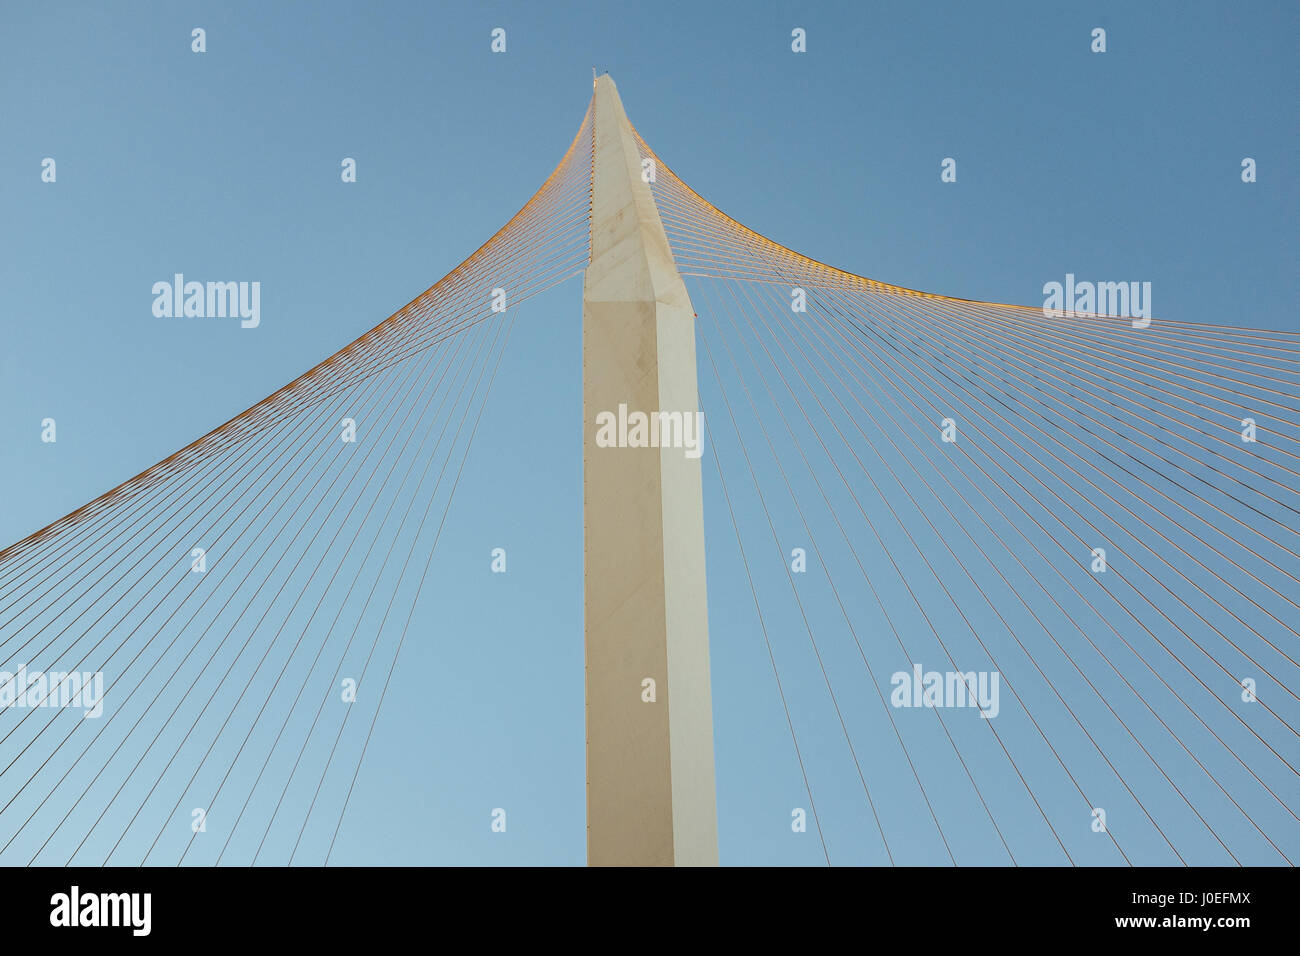 The Bridge of Strings also known as the Chords Bridge or Jerusalem Light Rail is a cantilever spar cable-stayed bridge located in Jerusalem, Israel. S Stock Photo